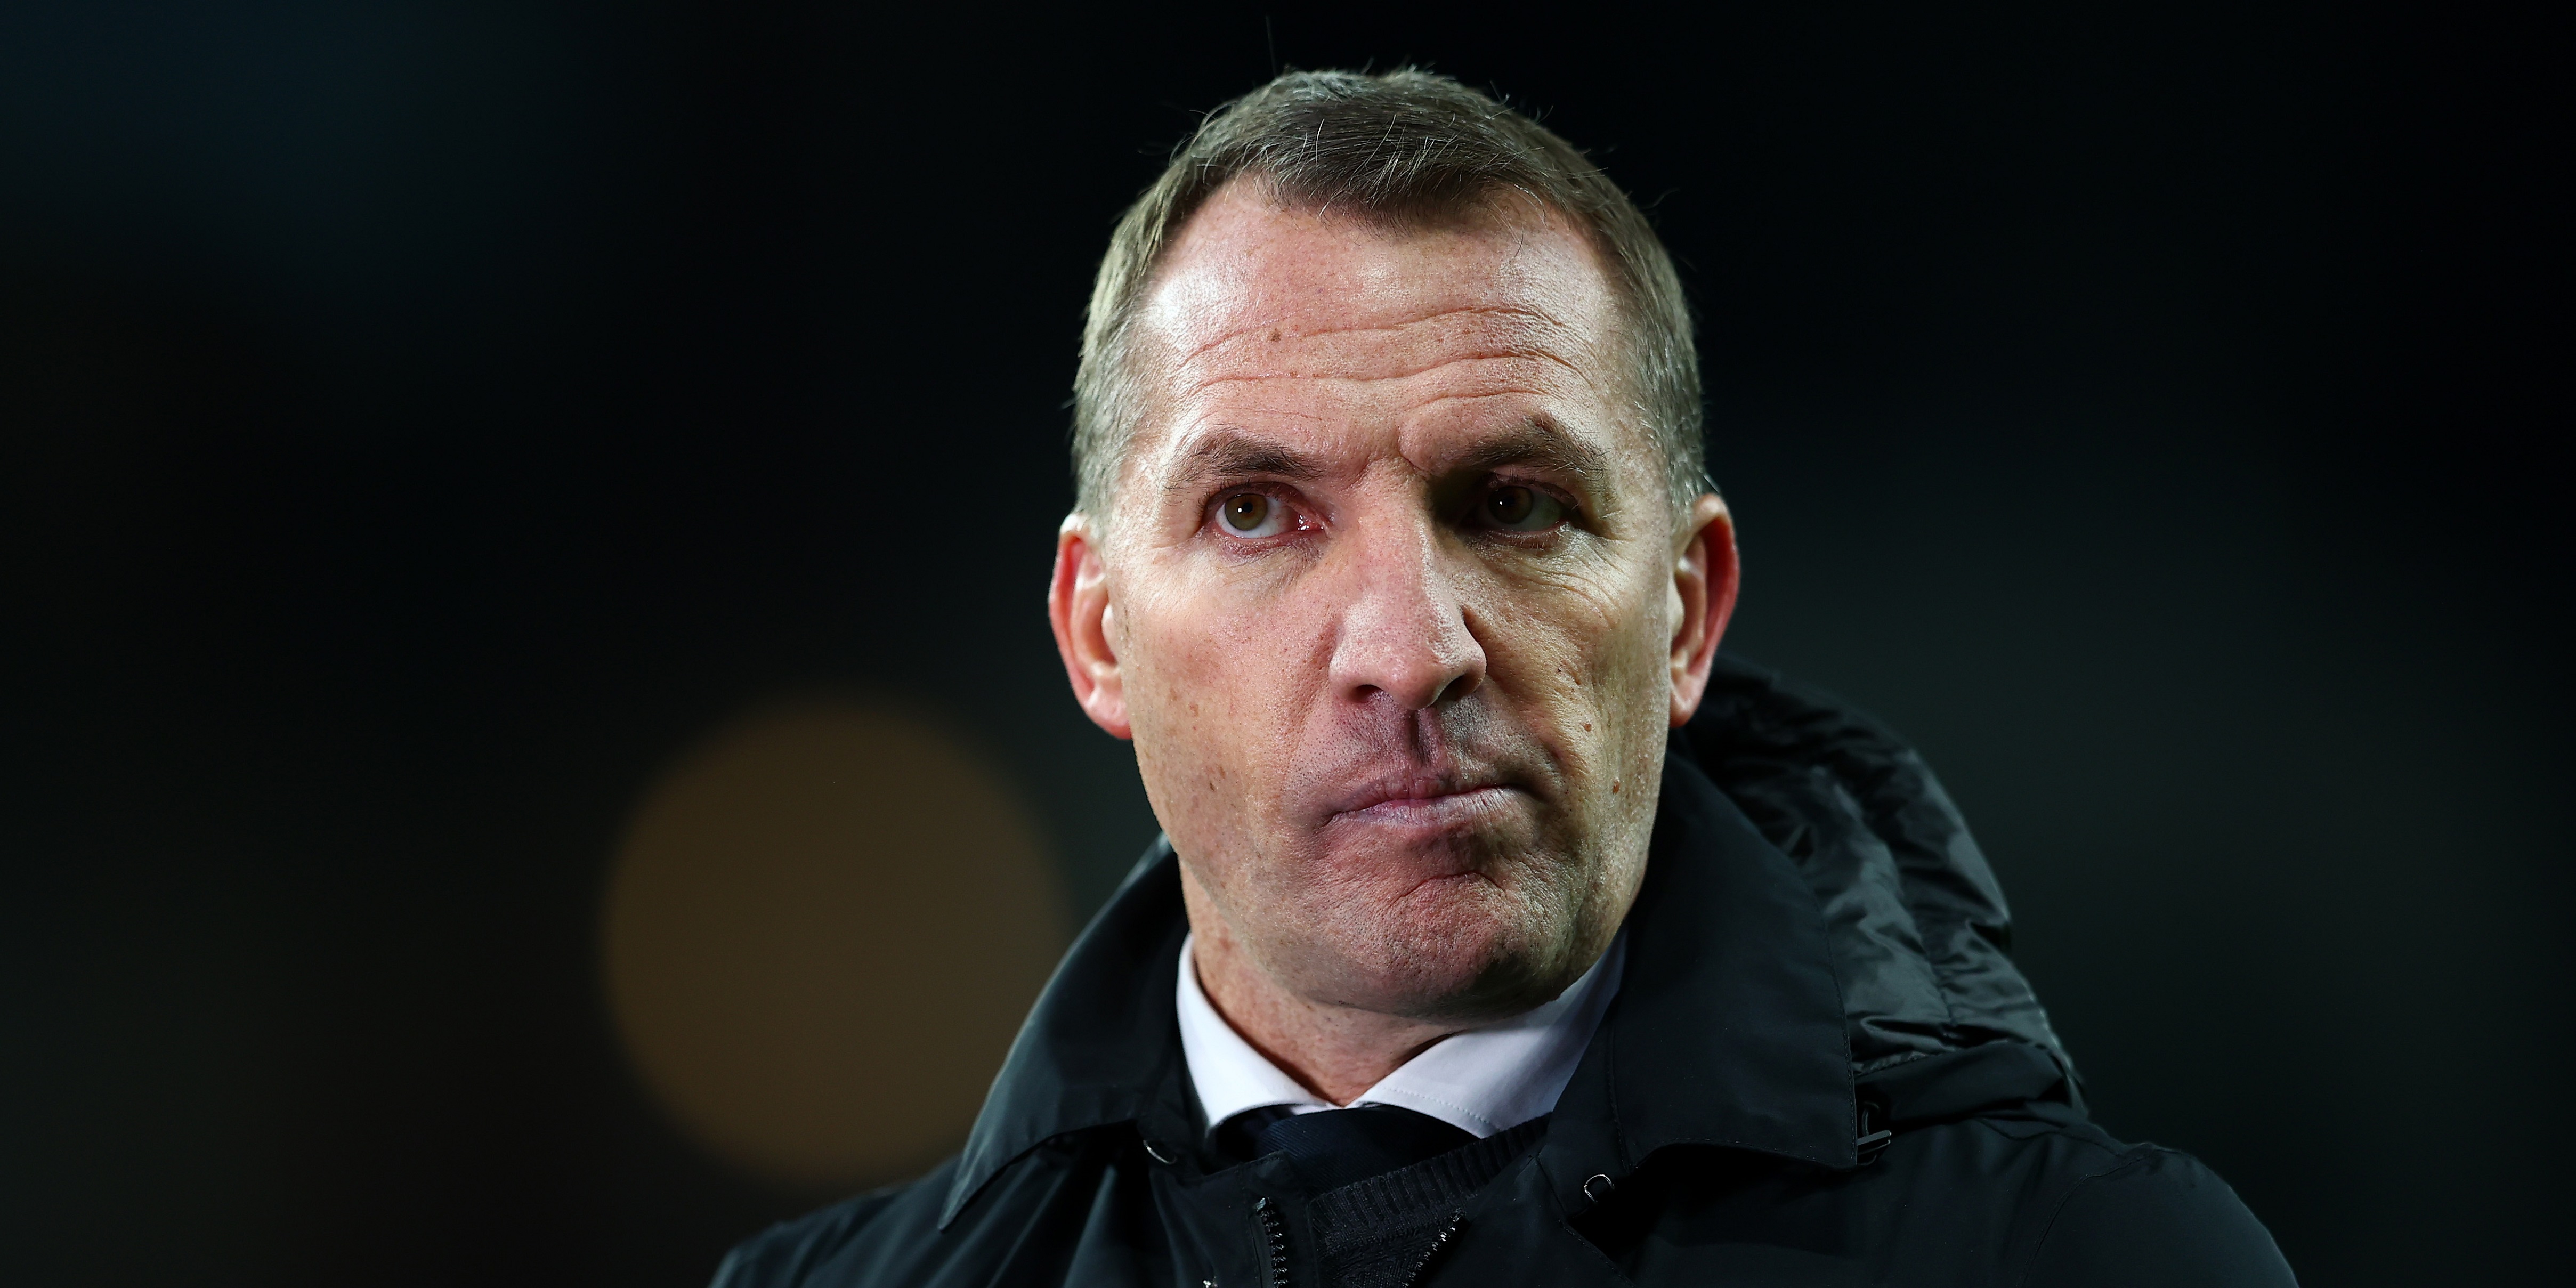 ‘So desperate’ ‘Rodgers still won’t win’ – Some Liverpool fans react to Leicester putting out full-strength outfit after Reds ring the changes for league cup